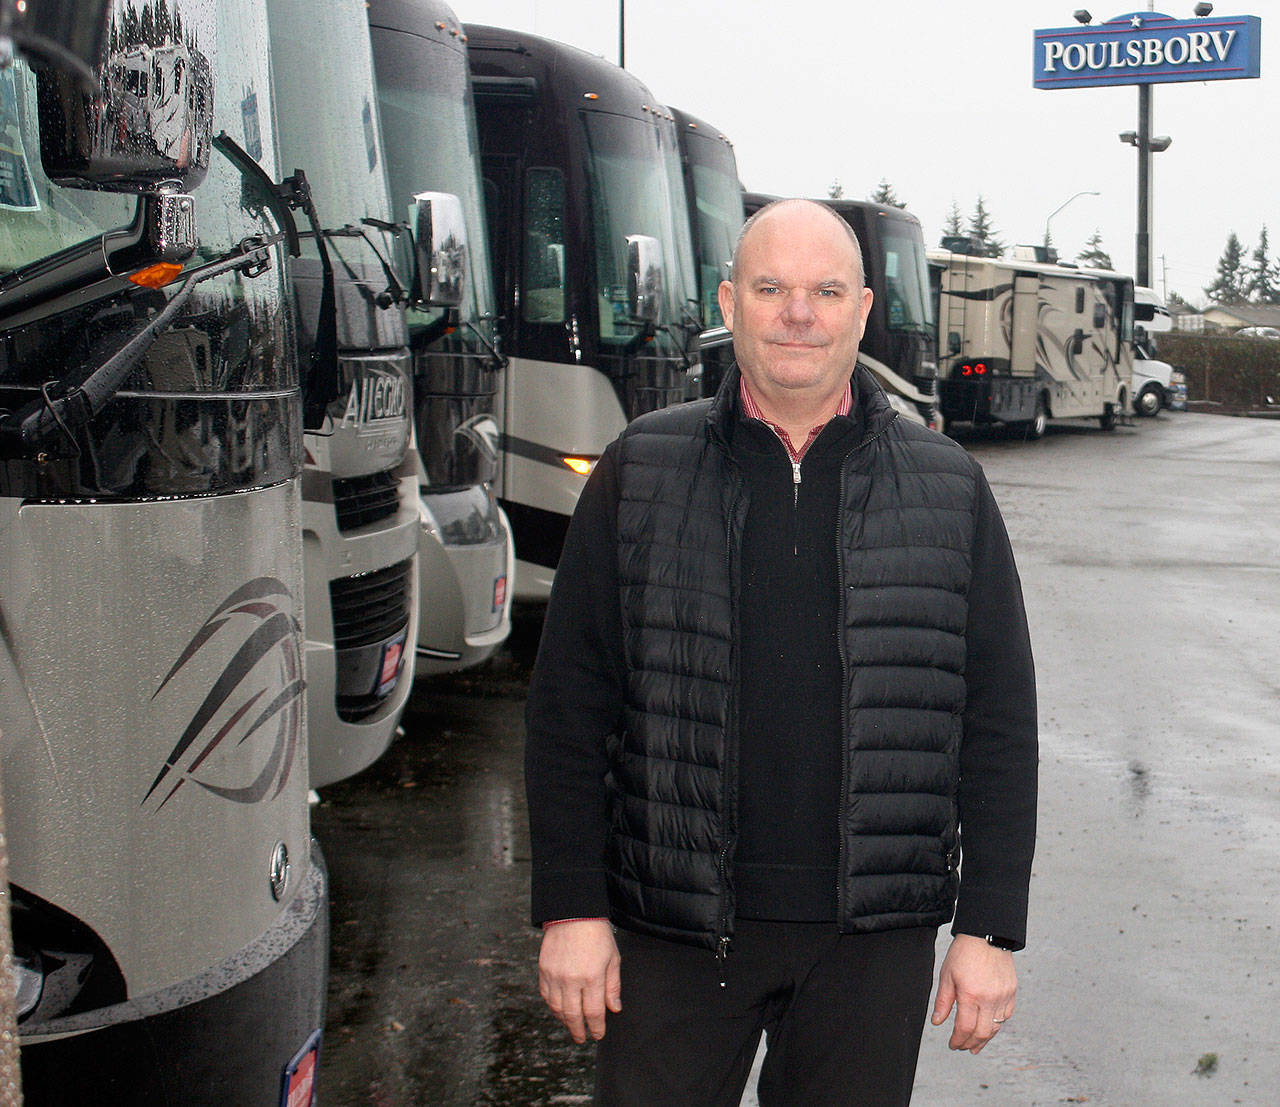 Will Rogers, Poulsbo RV chief operations officer, says the state Department of Transportation’s plans to tunnel under Interstate 5 to connect to State Route 509 at the site of the company’s Kent location, could force the move of RVs and employees as soon as 2020. STEVE HUNTER, Kent Reporter